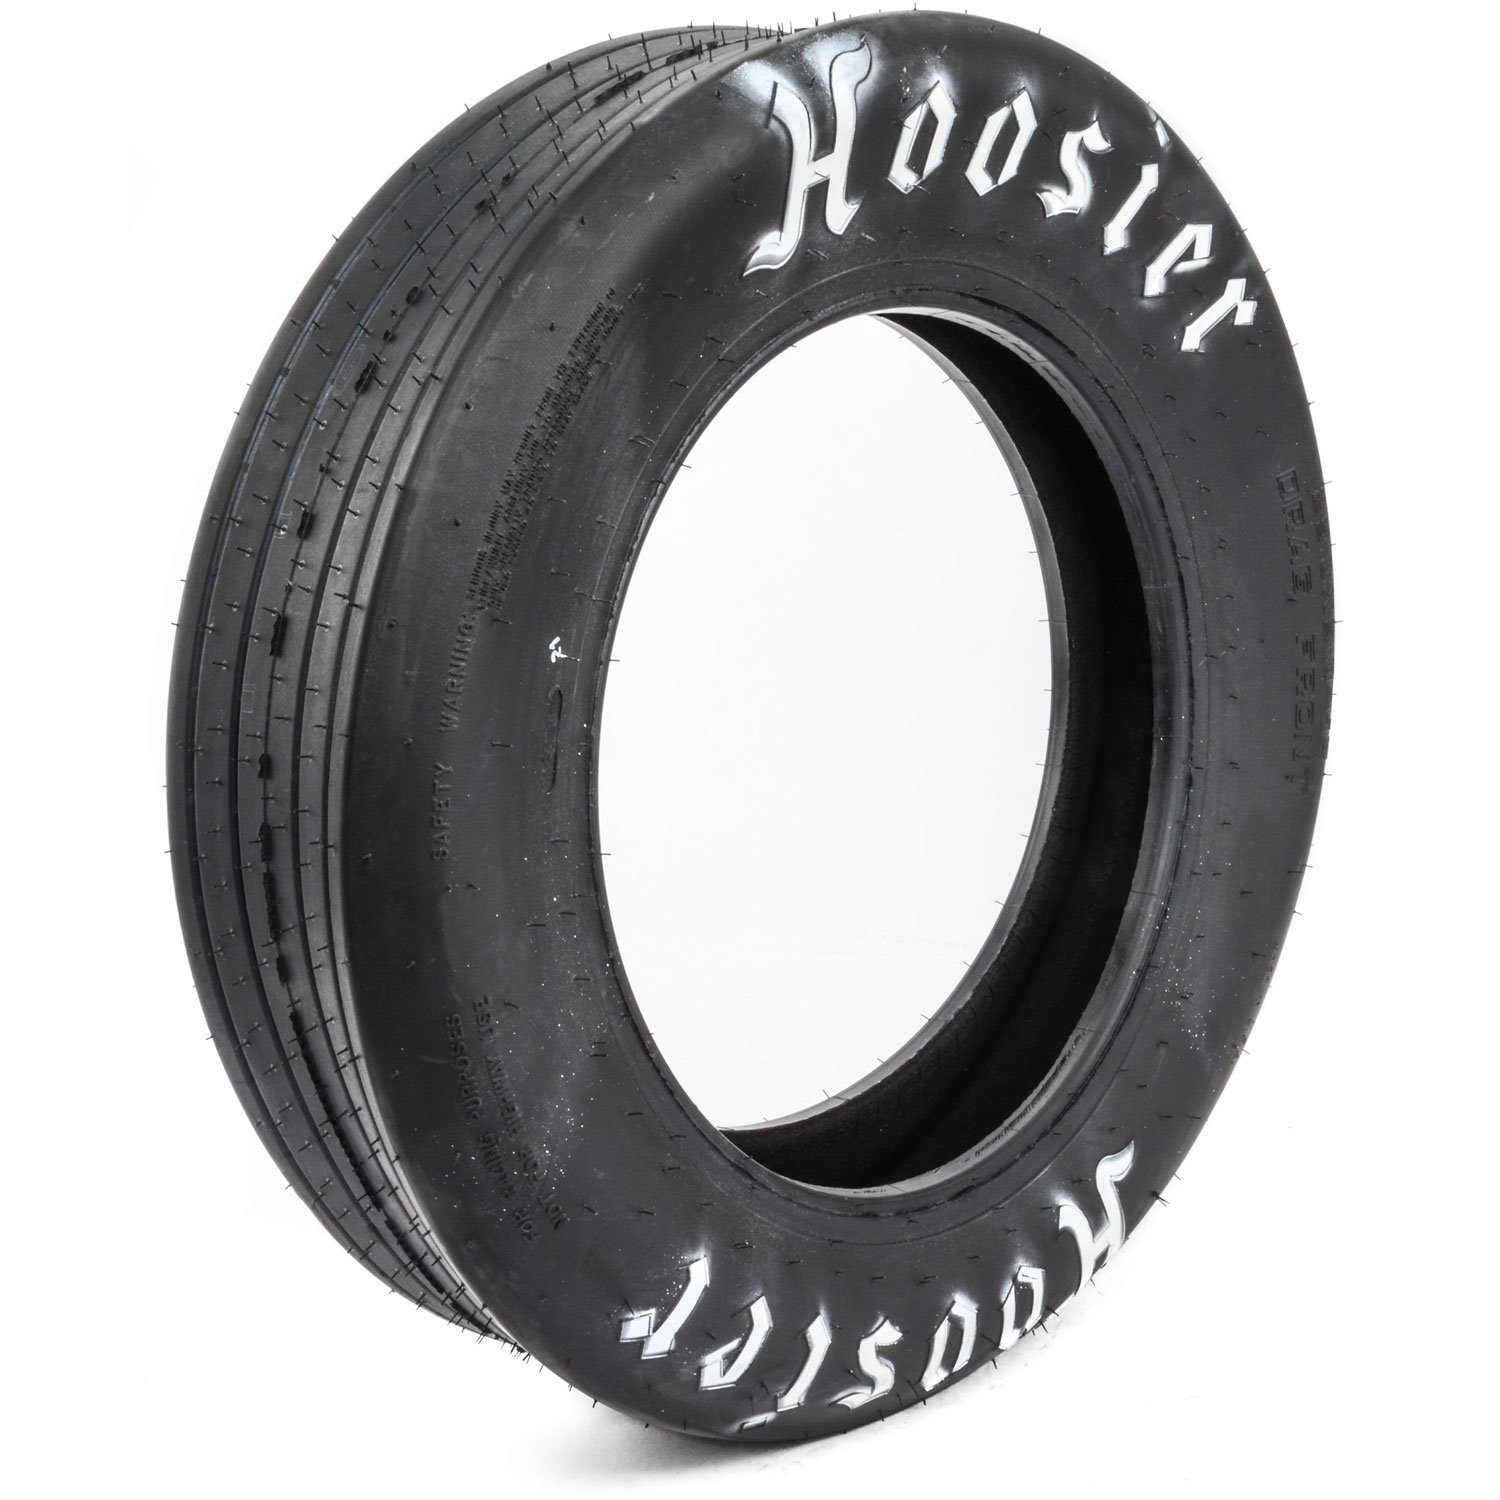 Front Drag Tire Tire Size: 25x5.0R15